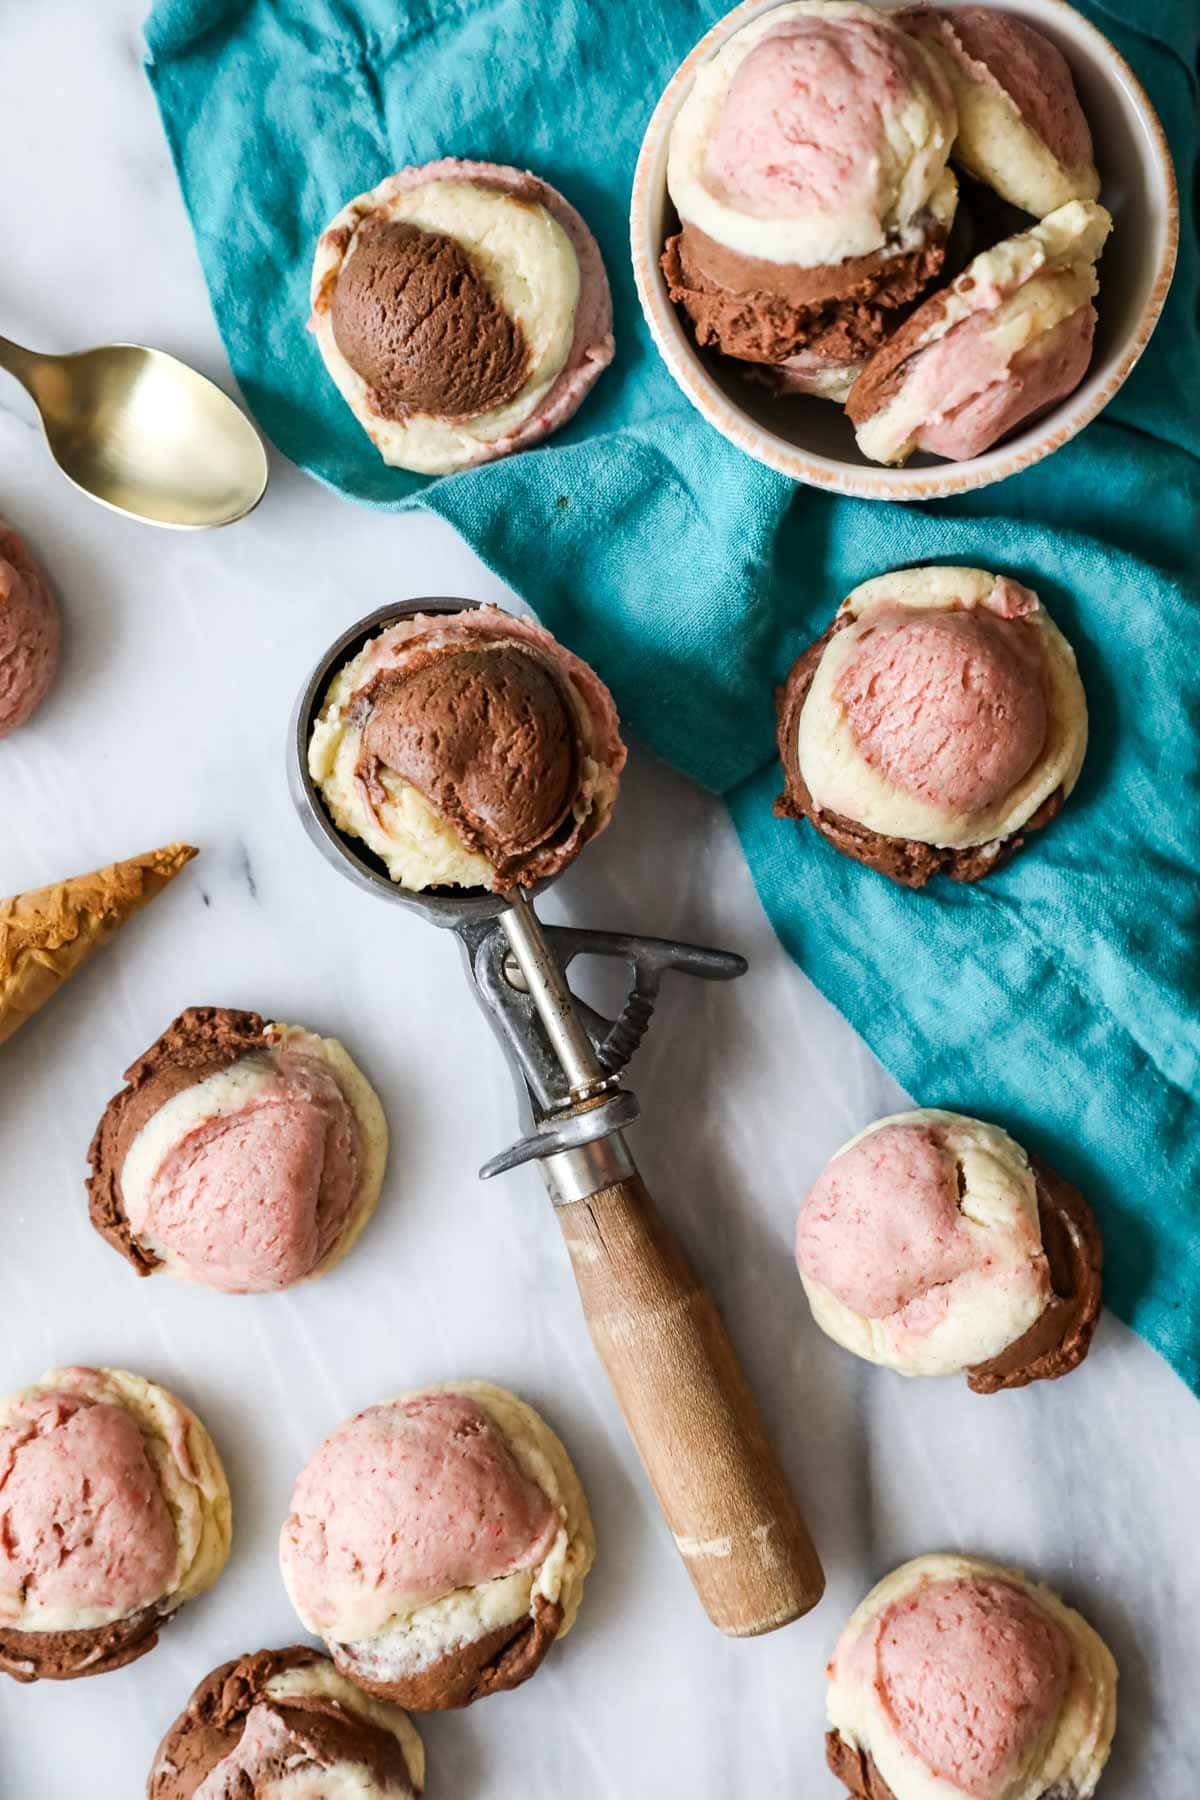 Neapolitan cookies scattered across a countertop with one cookie resting in an ice cream scoop.